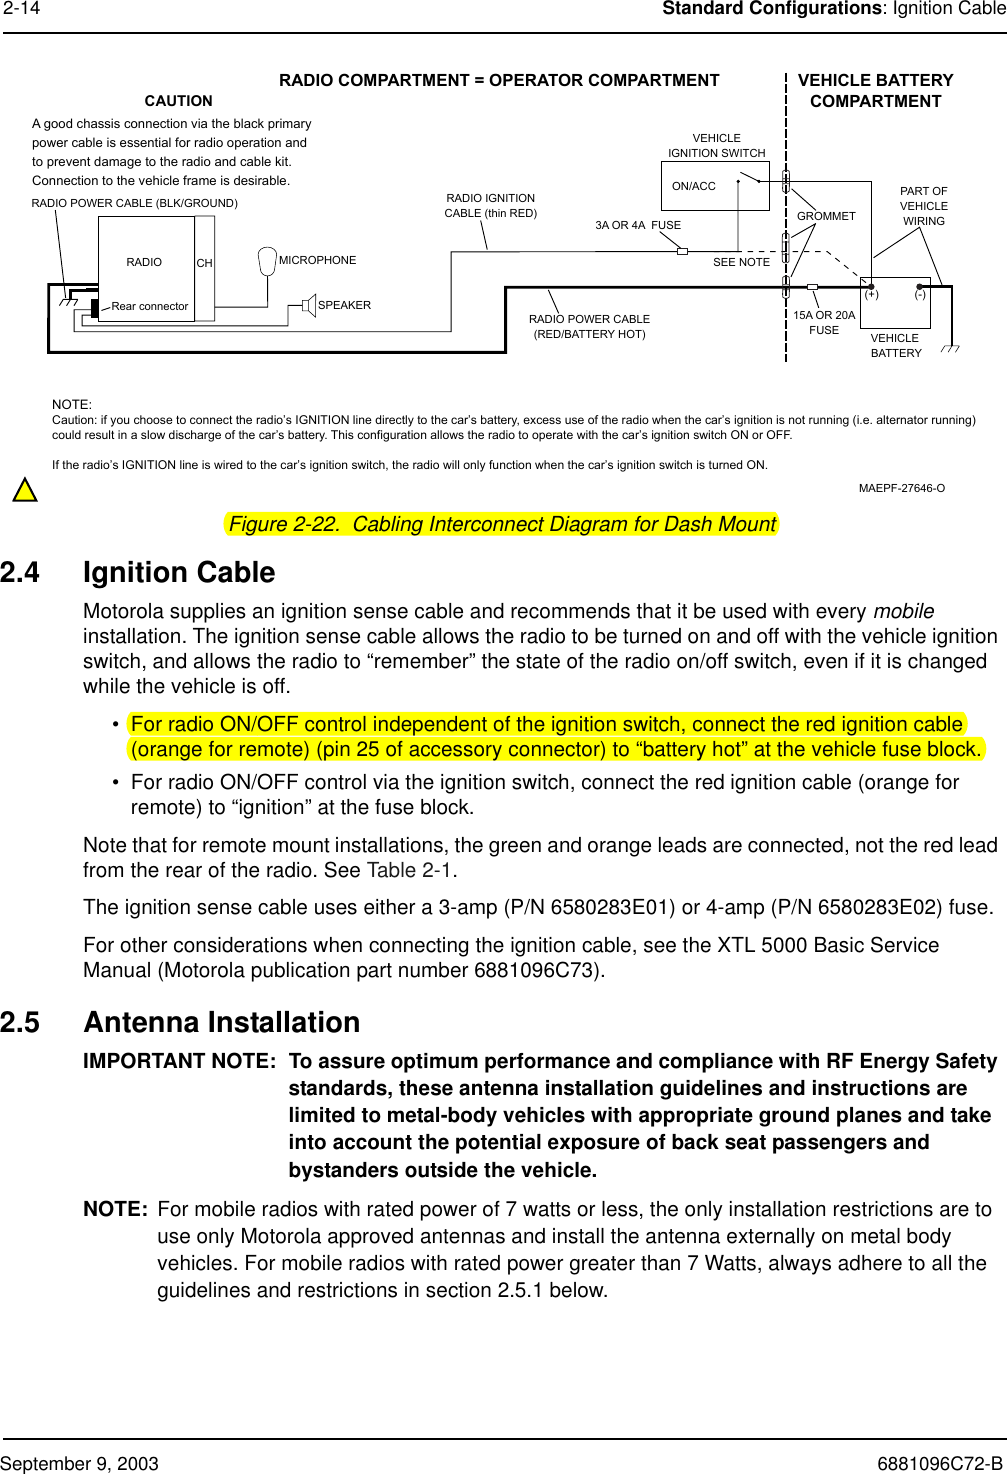 September 9, 2003 6881096C72-B2-14 Standard Configurations: Ignition CableFigure 2-22.  Cabling Interconnect Diagram for Dash Mount2.4 Ignition CableMotorola supplies an ignition sense cable and recommends that it be used with every mobile installation. The ignition sense cable allows the radio to be turned on and off with the vehicle ignition switch, and allows the radio to “remember” the state of the radio on/off switch, even if it is changed while the vehicle is off. • For radio ON/OFF control independent of the ignition switch, connect the red ignition cable (orange for remote) (pin 25 of accessory connector) to “battery hot” at the vehicle fuse block.• For radio ON/OFF control via the ignition switch, connect the red ignition cable (orange for remote) to “ignition” at the fuse block.Note that for remote mount installations, the green and orange leads are connected, not the red lead from the rear of the radio. See Table 2-1.The ignition sense cable uses either a 3-amp (P/N 6580283E01) or 4-amp (P/N 6580283E02) fuse.For other considerations when connecting the ignition cable, see the XTL 5000 Basic Service Manual (Motorola publication part number 6881096C73).2.5 Antenna InstallationIMPORTANT NOTE: To assure optimum performance and compliance with RF Energy Safety standards, these antenna installation guidelines and instructions are limited to metal-body vehicles with appropriate ground planes and take into account the potential exposure of back seat passengers and bystanders outside the vehicle. NOTE: For mobile radios with rated power of 7 watts or less, the only installation restrictions are to use only Motorola approved antennas and install the antenna externally on metal body vehicles. For mobile radios with rated power greater than 7 Watts, always adhere to all the guidelines and restrictions in section 2.5.1 below. RADIO COMPARTMENT = OPERATOR COMPARTMENT VEHICLE BATTERYCOMPARTMENTA good chassis connection via the black primary power cable is essential for radio operation and to prevent damage to the radio and cable kit.  Connection to the vehicle frame is desirable.VEHICLE BATTERY15A OR 20AFUSEPART OFVEHICLEWIRINGVEHICLEIGNITION SWITCHON/ACCGROMMETRADIO POWER CABLE(RED/BATTERY HOT)RADIO IGNITIONCABLE (thin RED)SPEAKER3A OR 4A  FUSEMICROPHONERADIO POWER CABLE (BLK/GROUND)RADIO(-)(+)CAUTIONMAEPF-27646-ORear connectorCH SEE NOTENOTE:Caution: if you choose to connect the radio’s IGNITION line directly to the car’s battery, excess use of the radio when the car’s ignition is not running (i.e. alternator running) could result in a slow discharge of the car’s battery. This configuration allows the radio to operate with the car’s ignition switch ON or OFF.If the radio’s IGNITION line is wired to the car’s ignition switch, the radio will only function when the car’s ignition switch is turned ON.